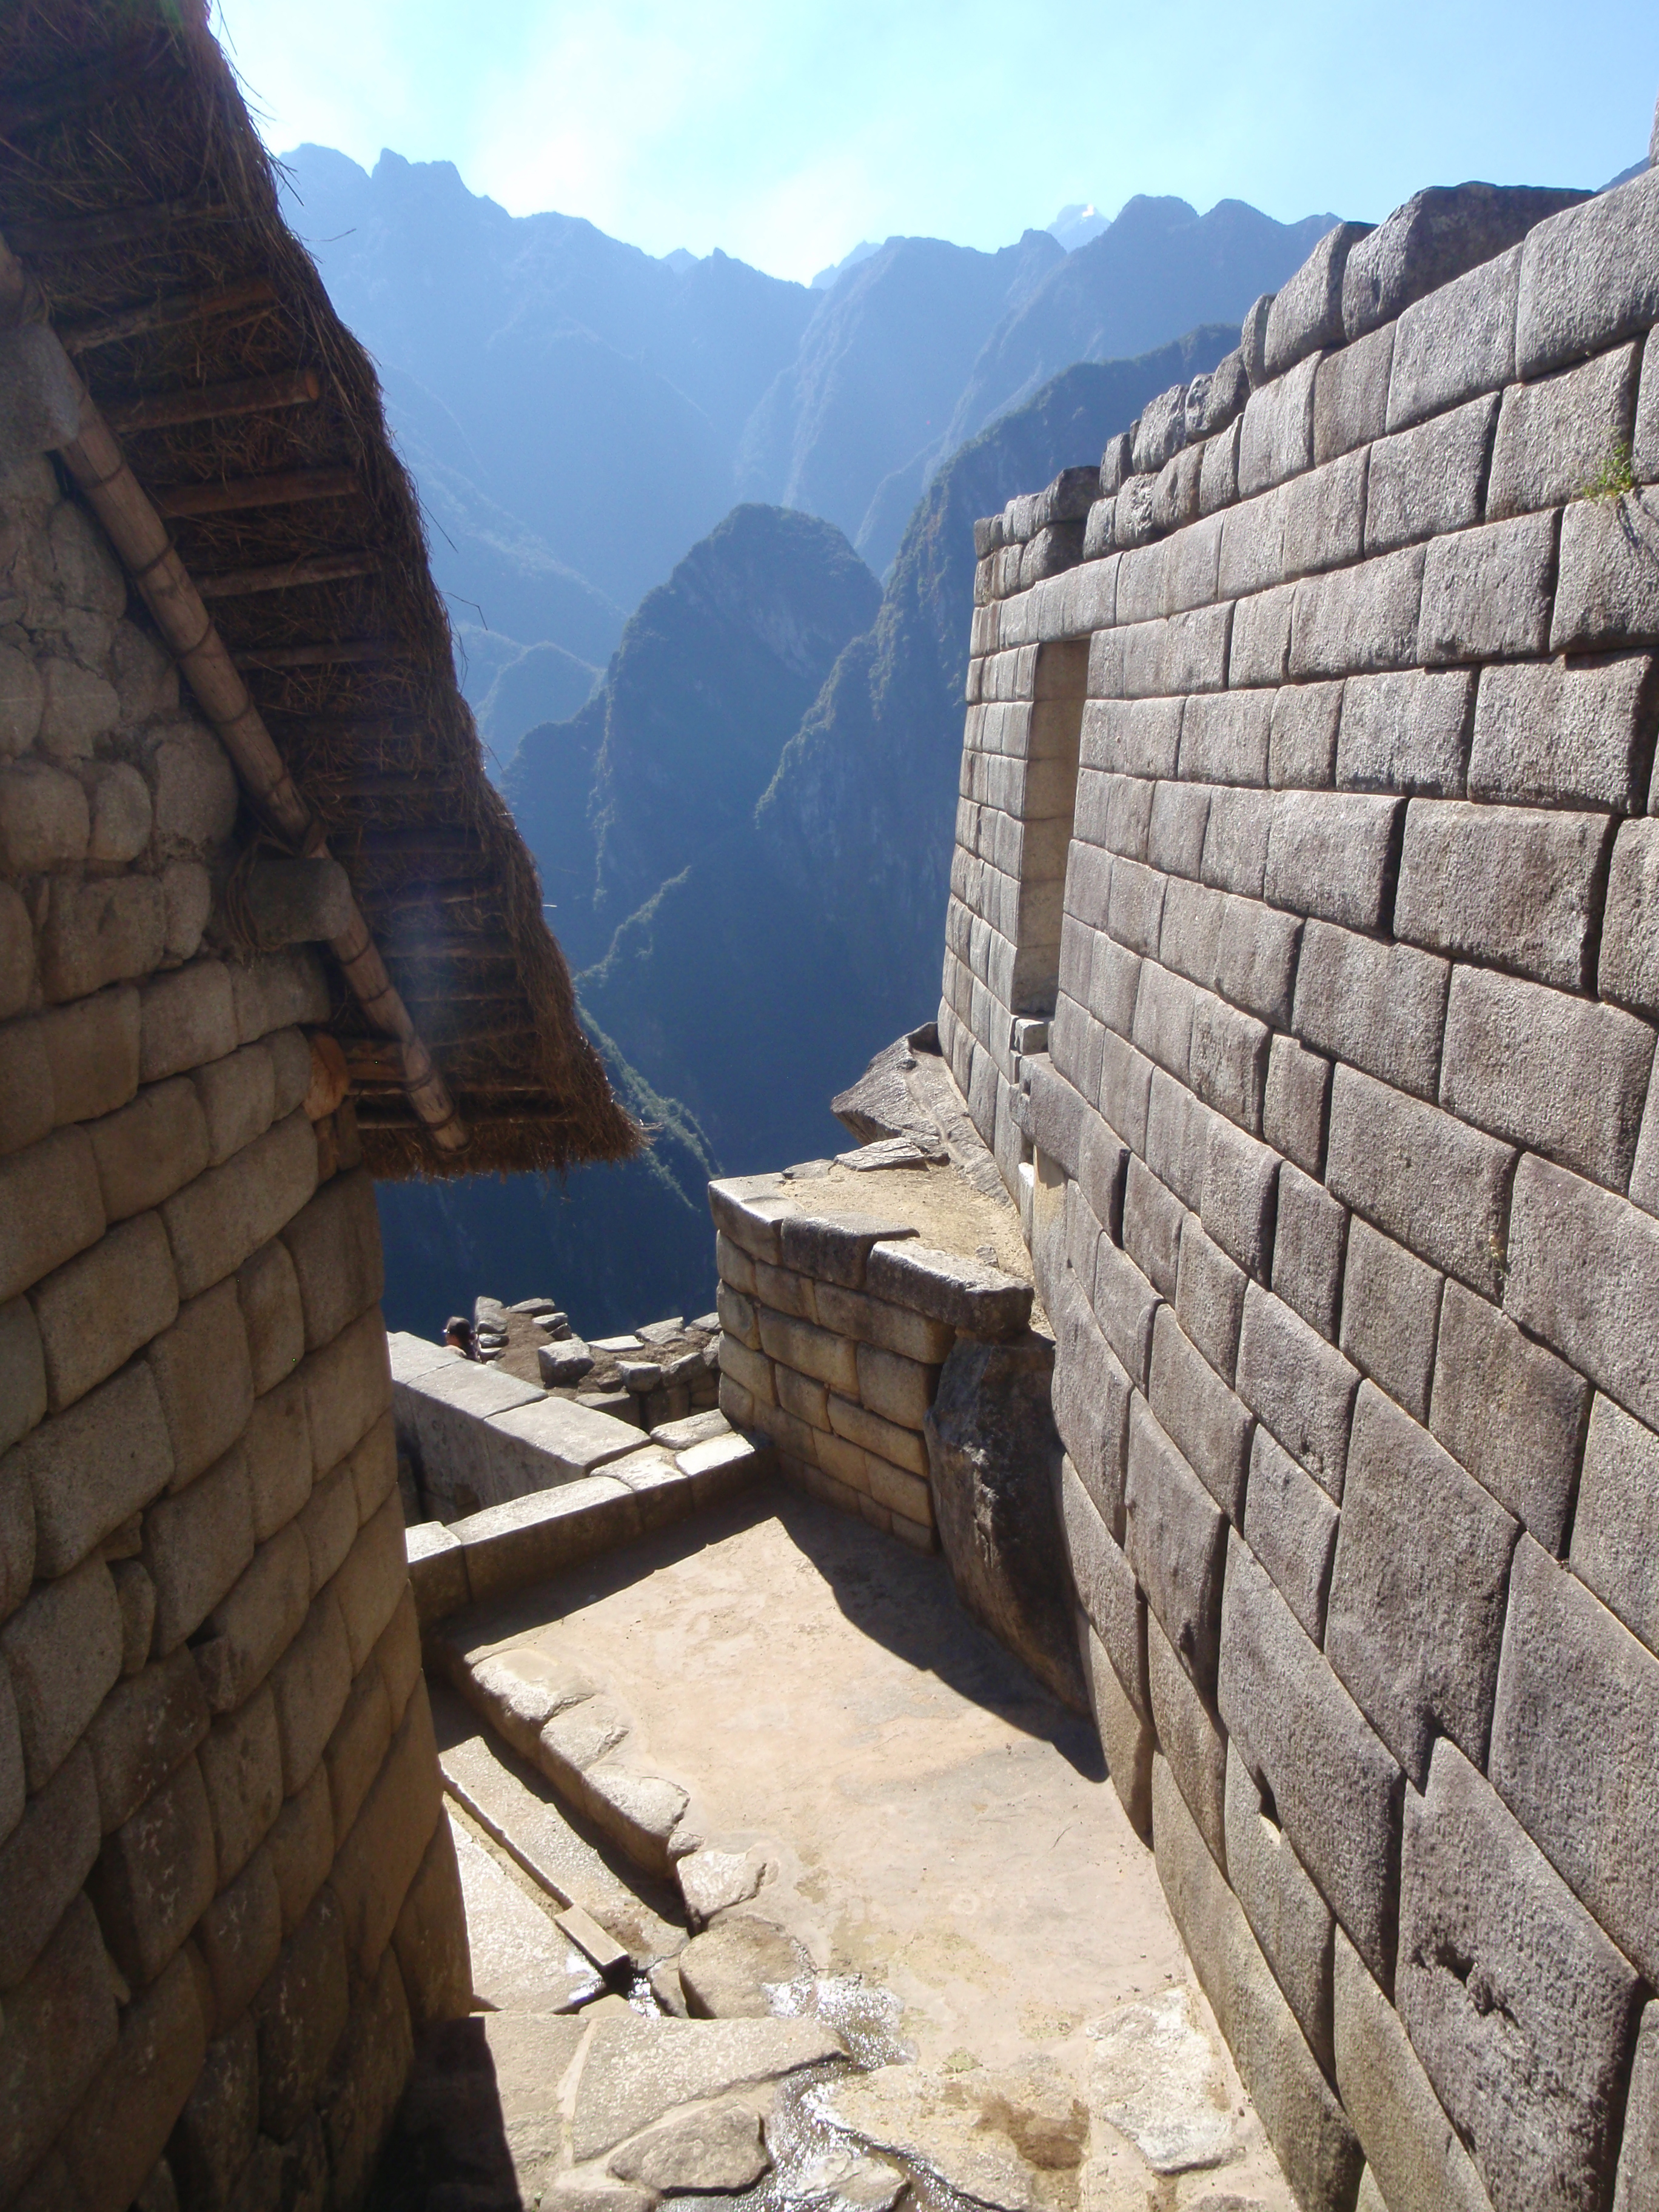 Alley view at Machu Picchu, Peru overlooking the valley below. Image search